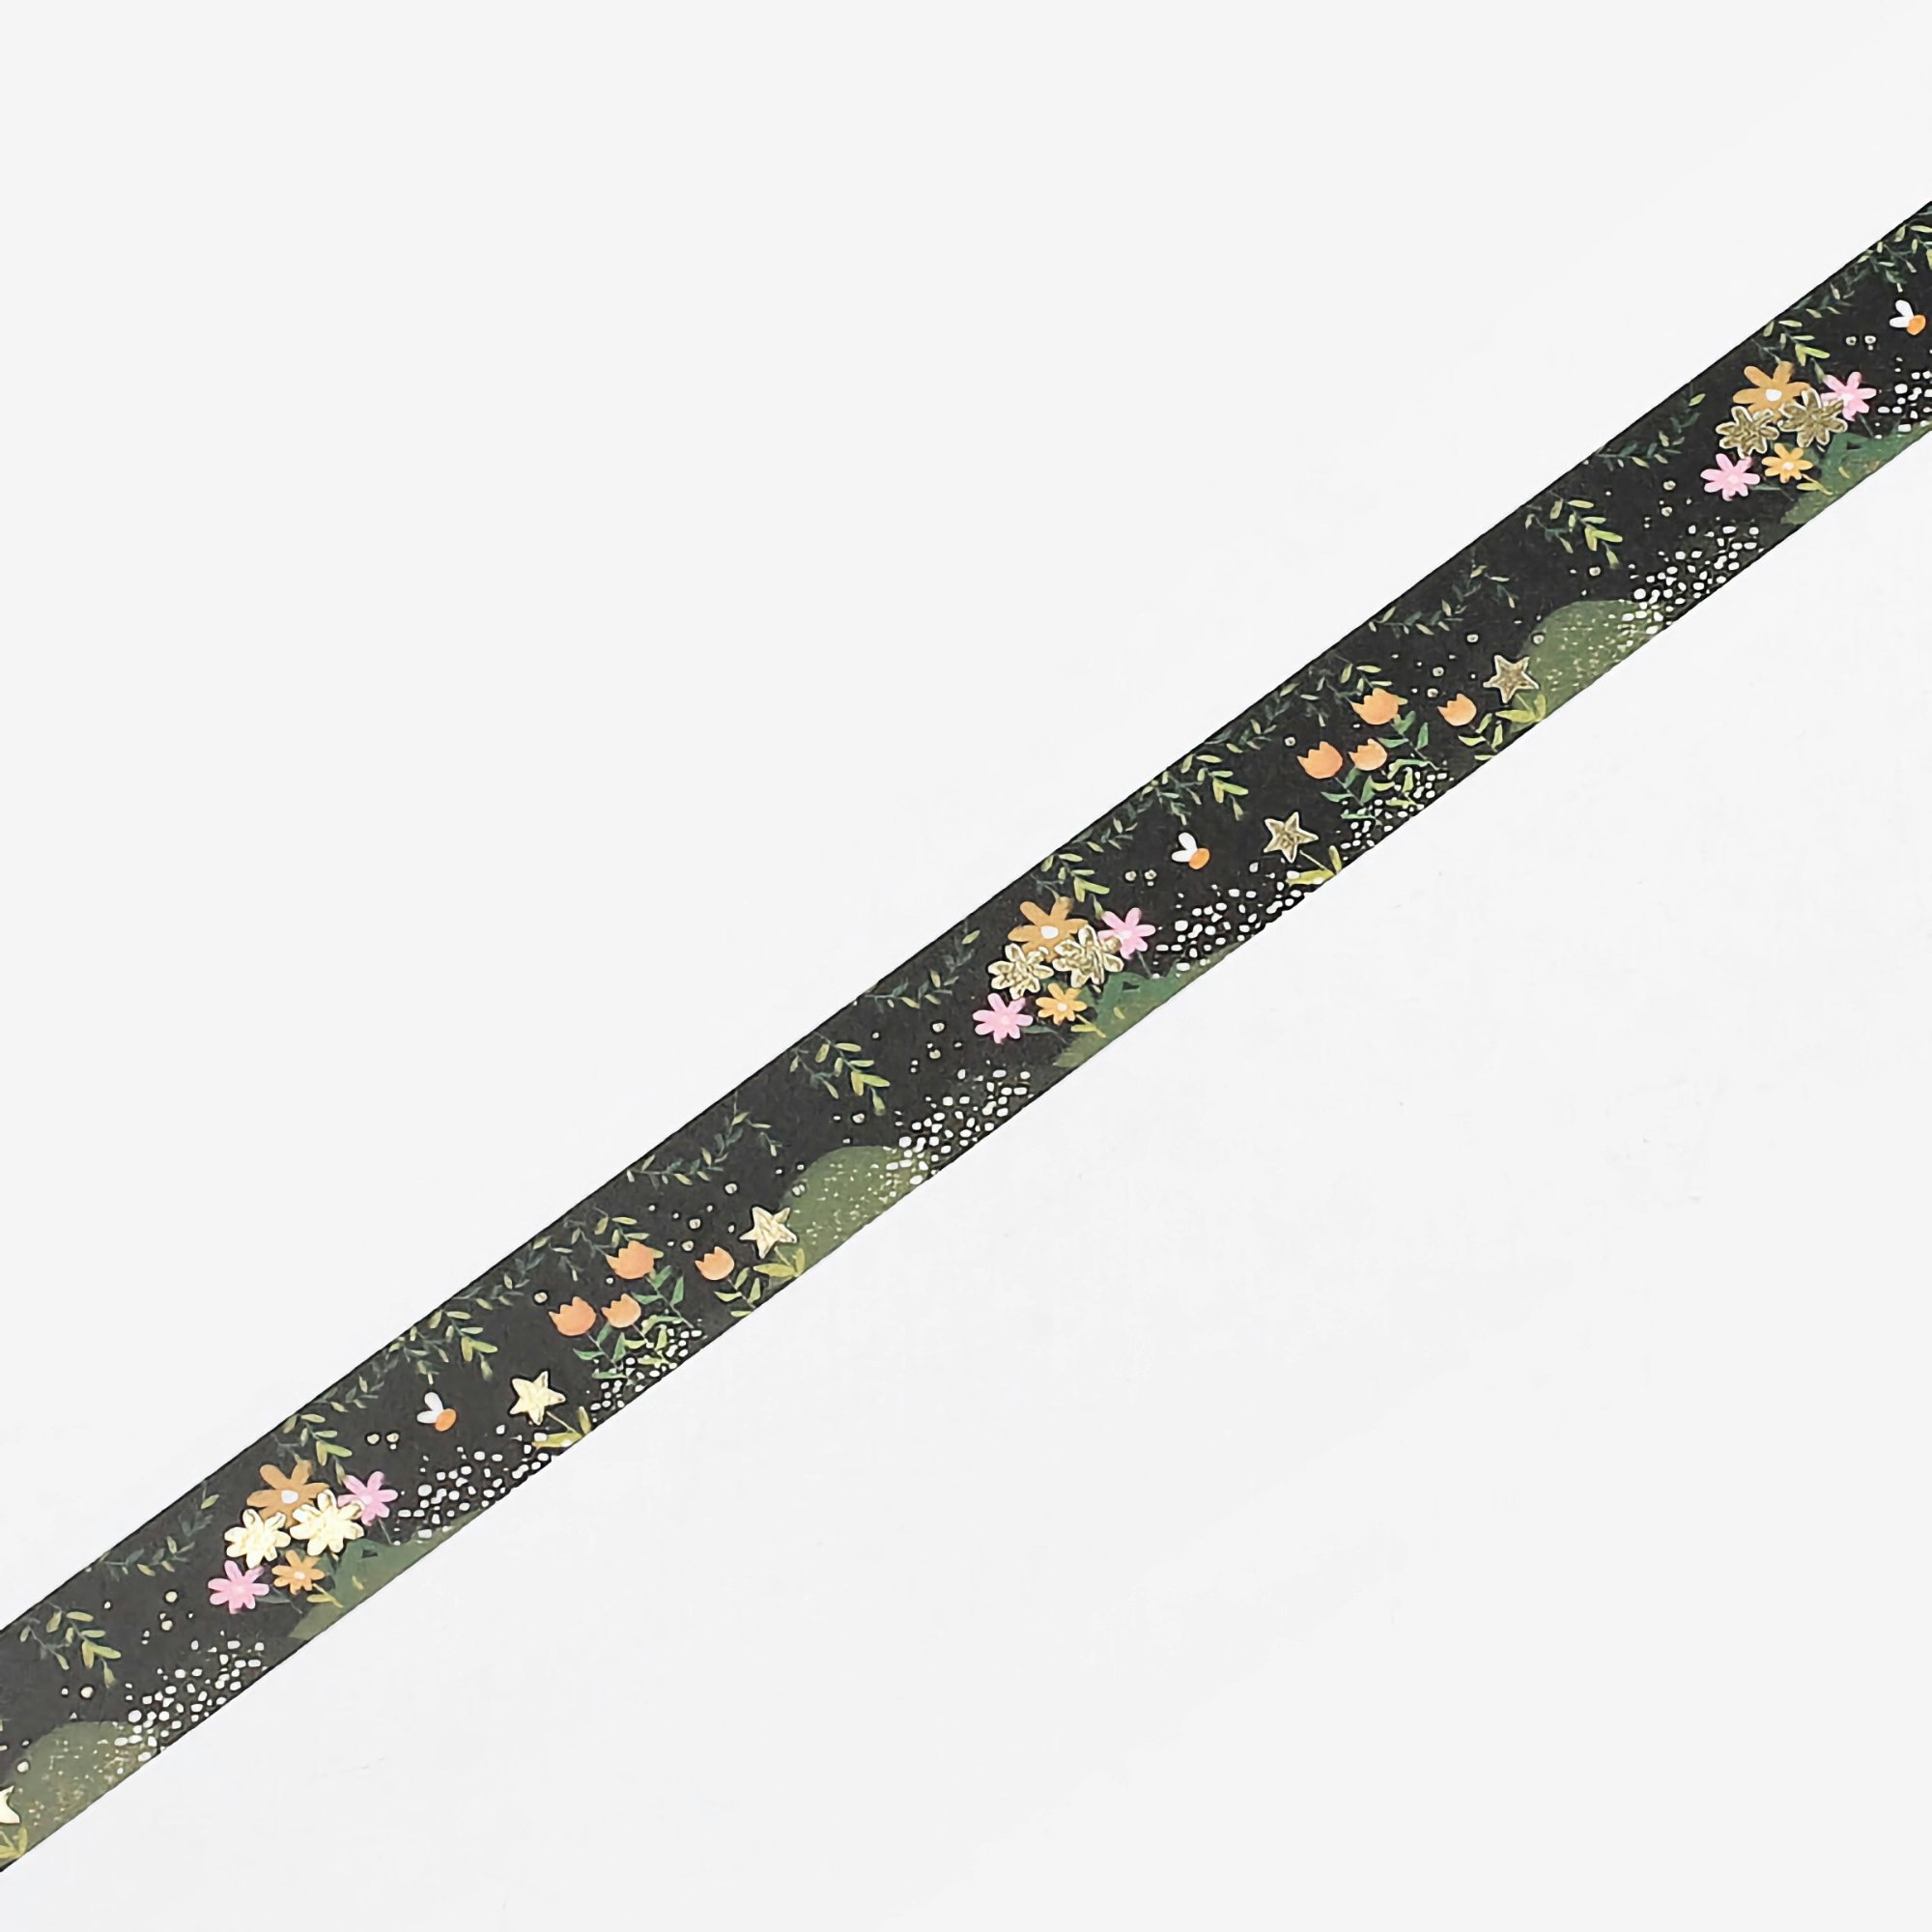 BGM Washi Tape Special Foil Firefly Forest 15 mm